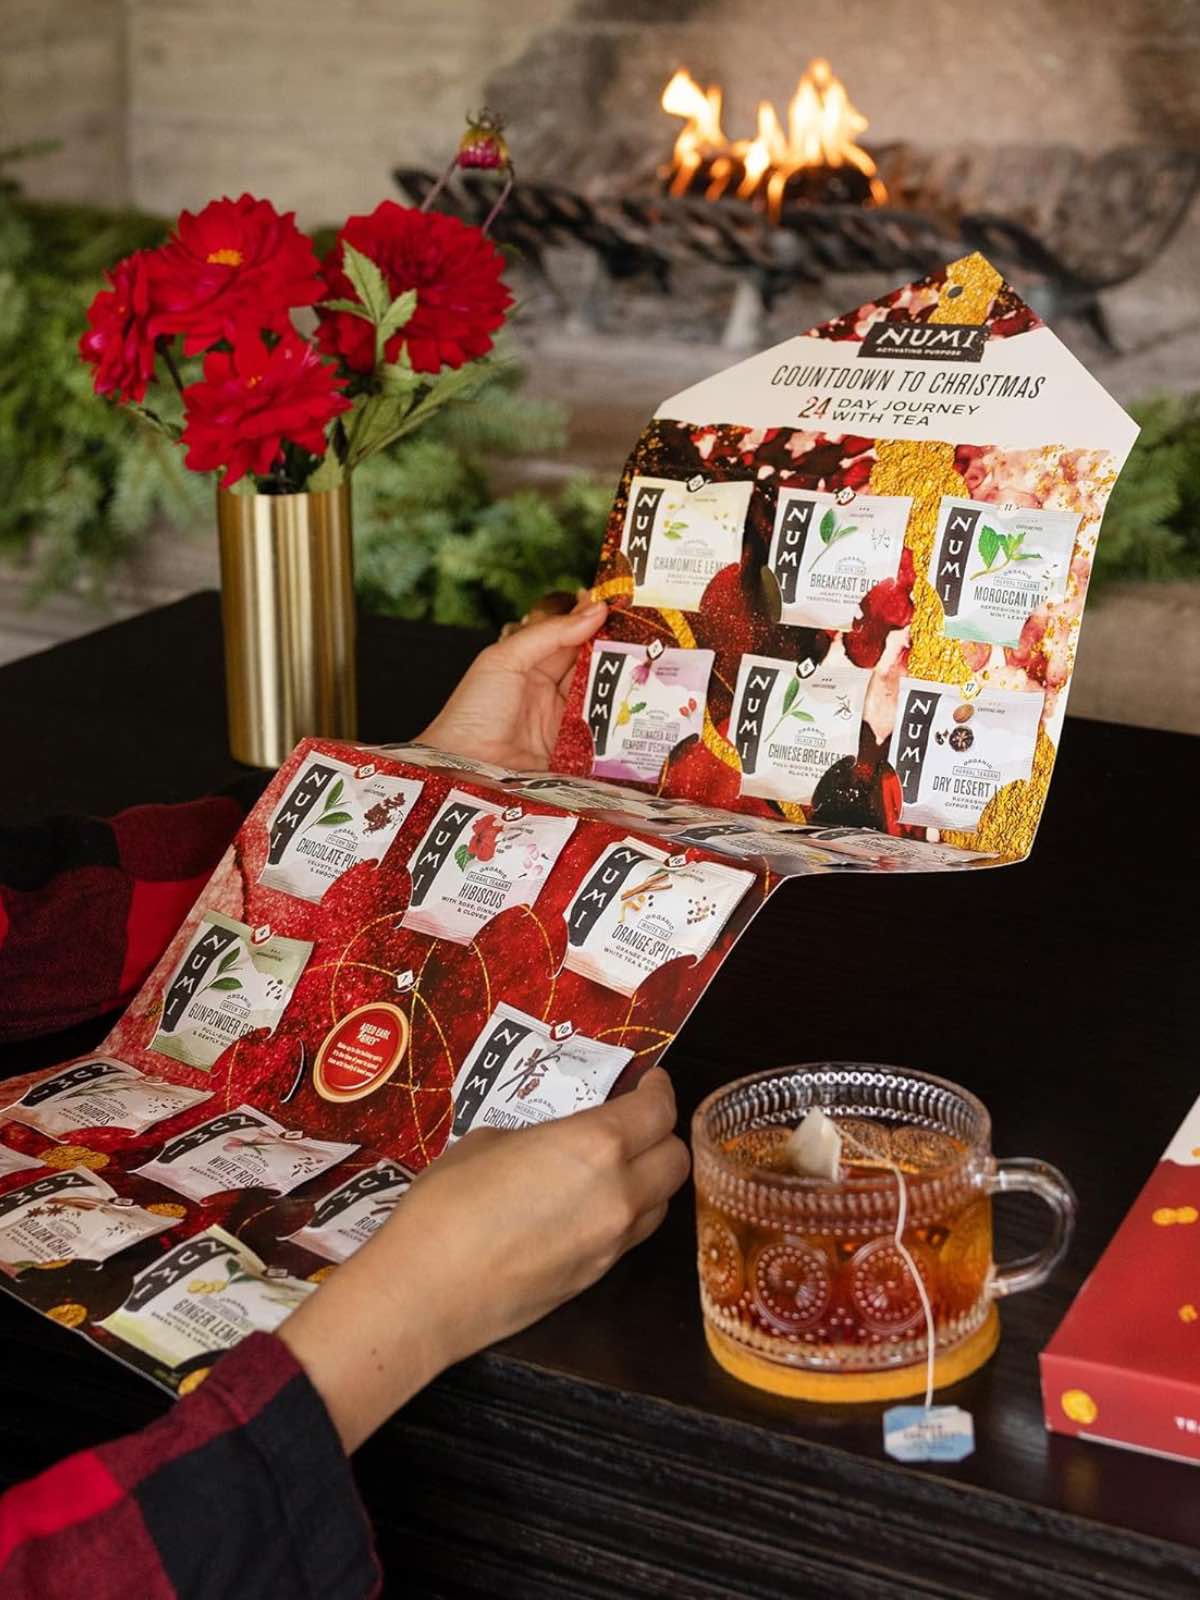 Numi tea advent calendar that unfolds with tea packets every day until Christmas. 